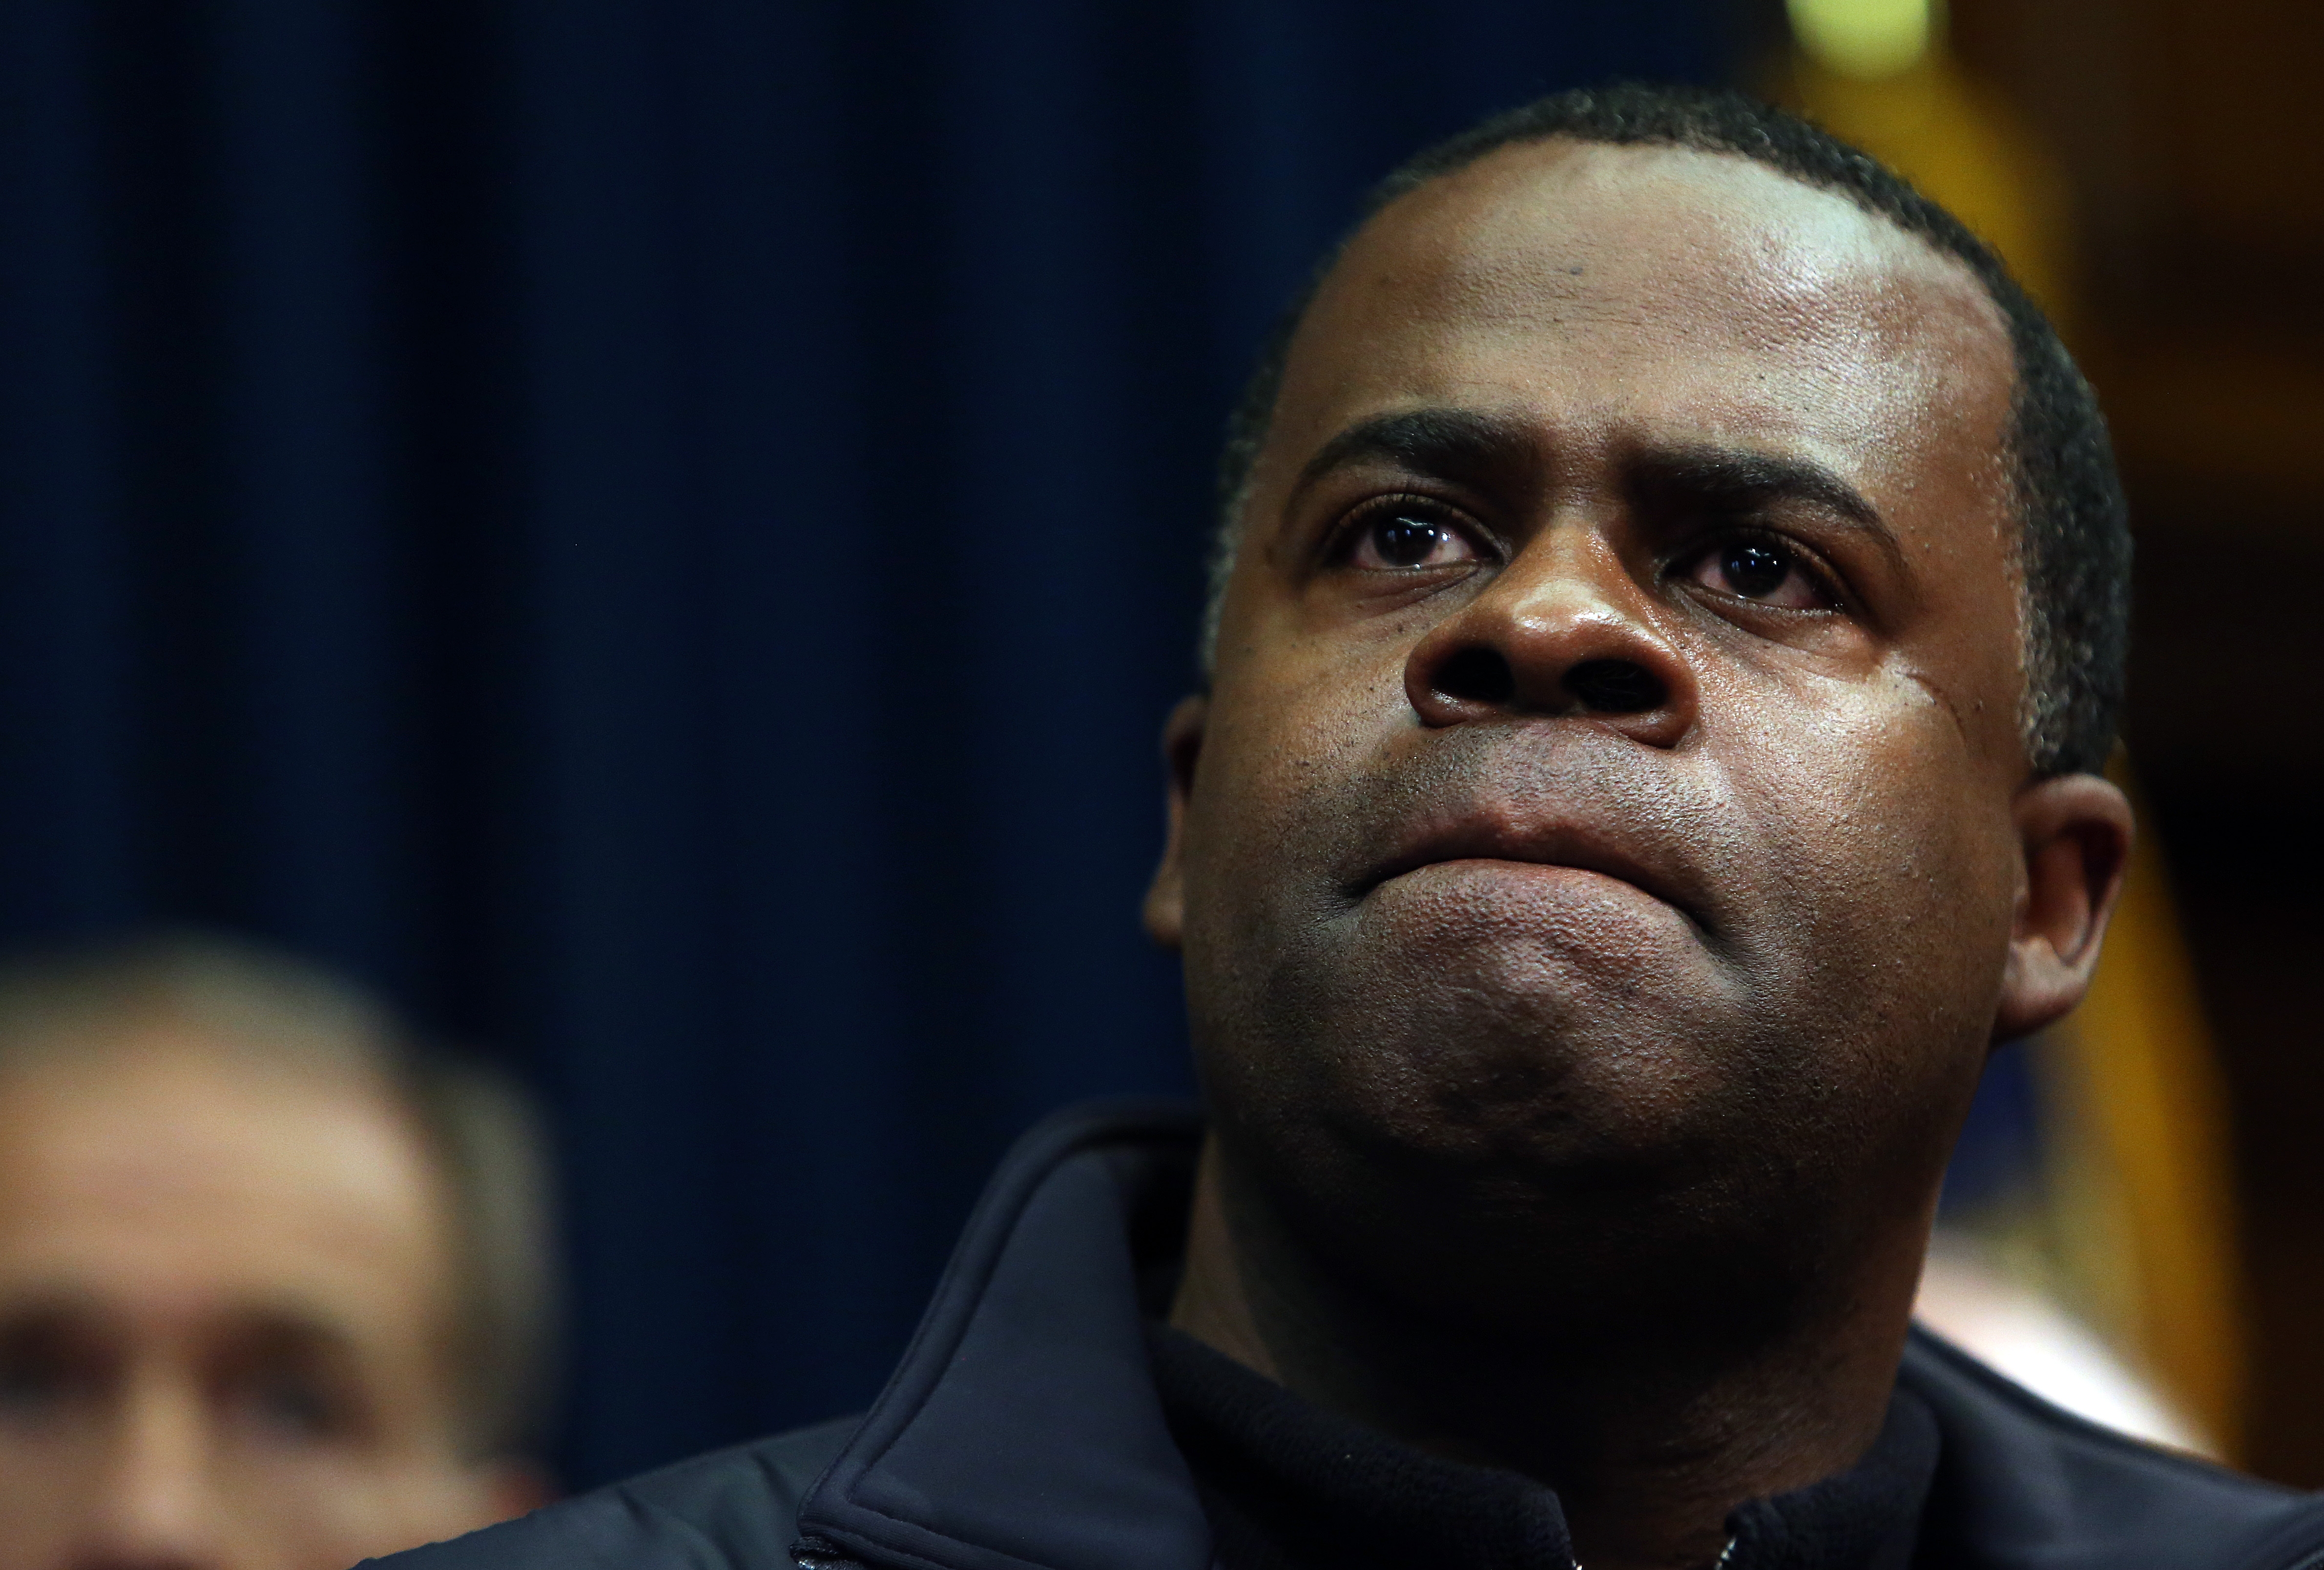 Atlanta Mayor Kasim Reed listens to a question about the city's response to the snow storm during a news conference Wednesday, Jan. 29, 2014 in the Governor's office at the State Capitol in Atlanta.